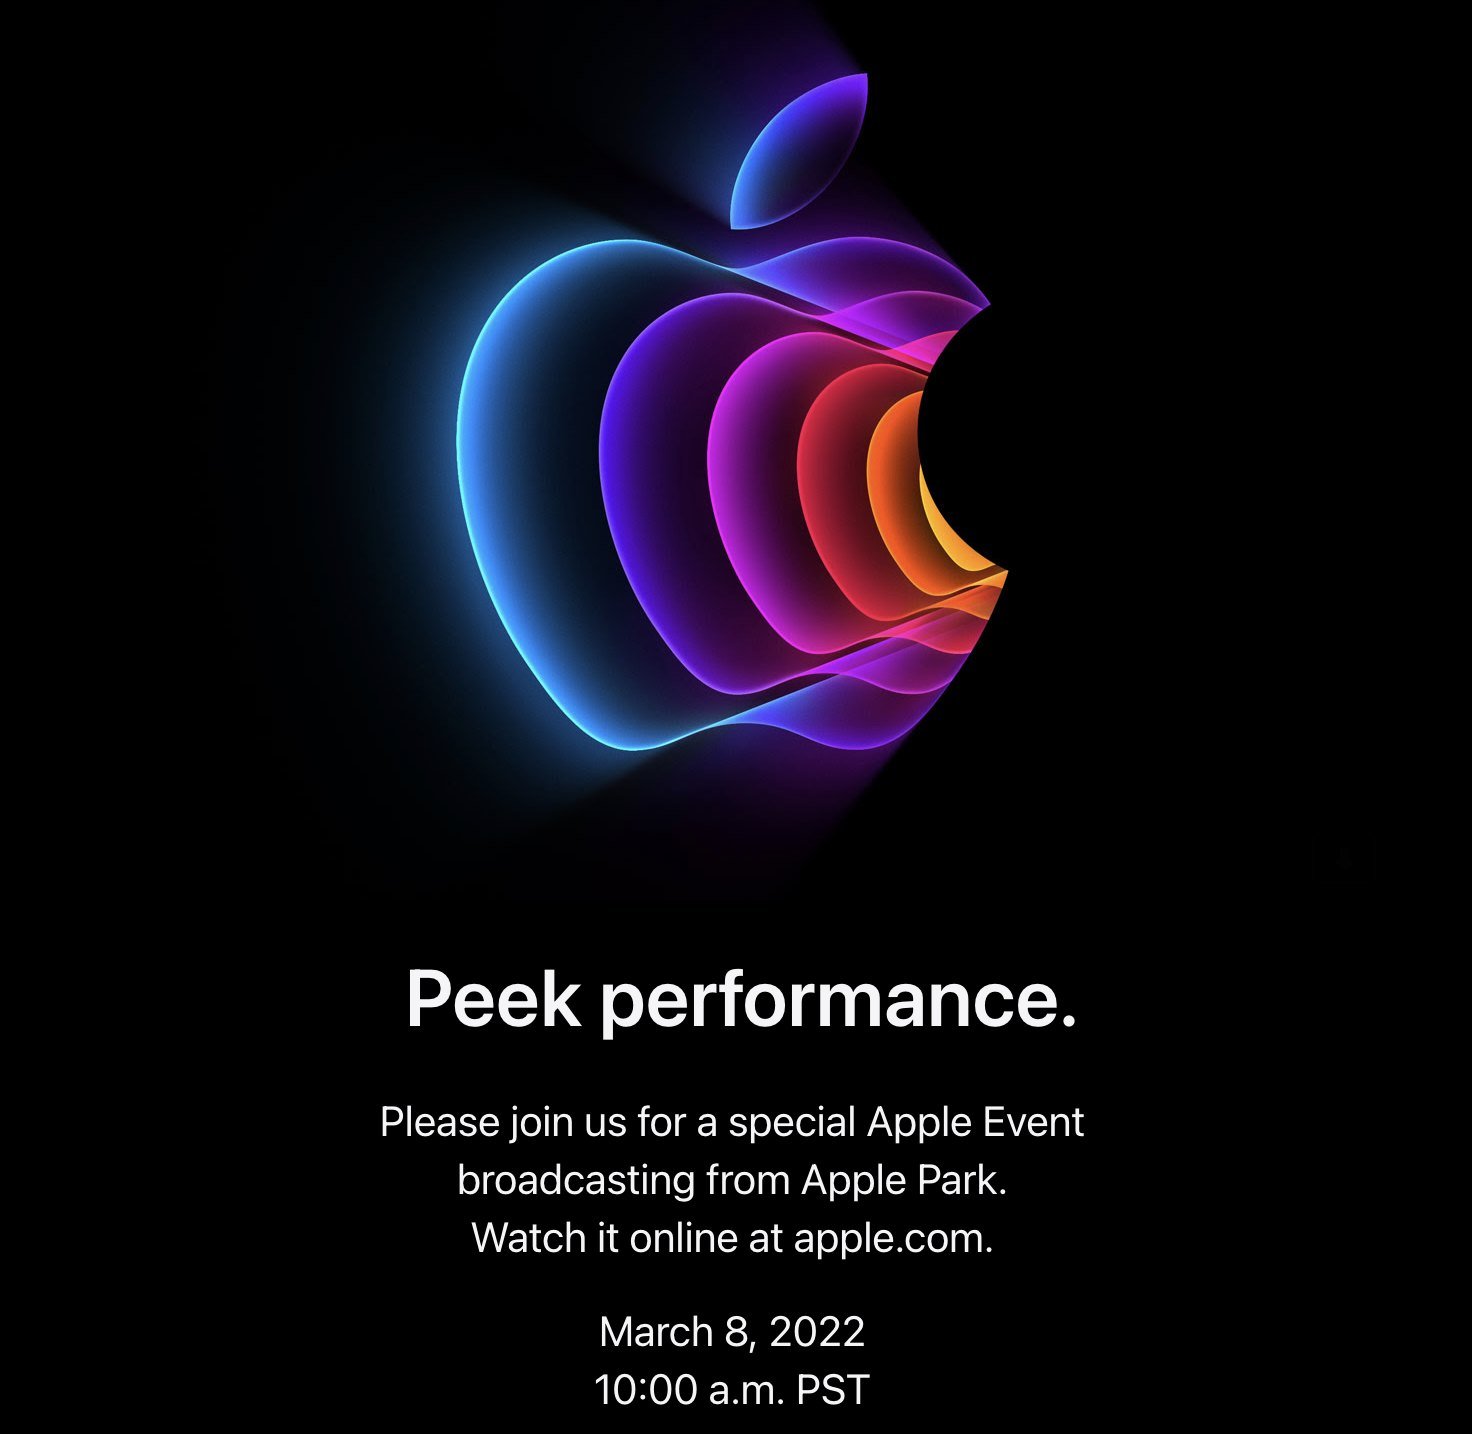 Apple officially announces "Peek Performance" event on March 8